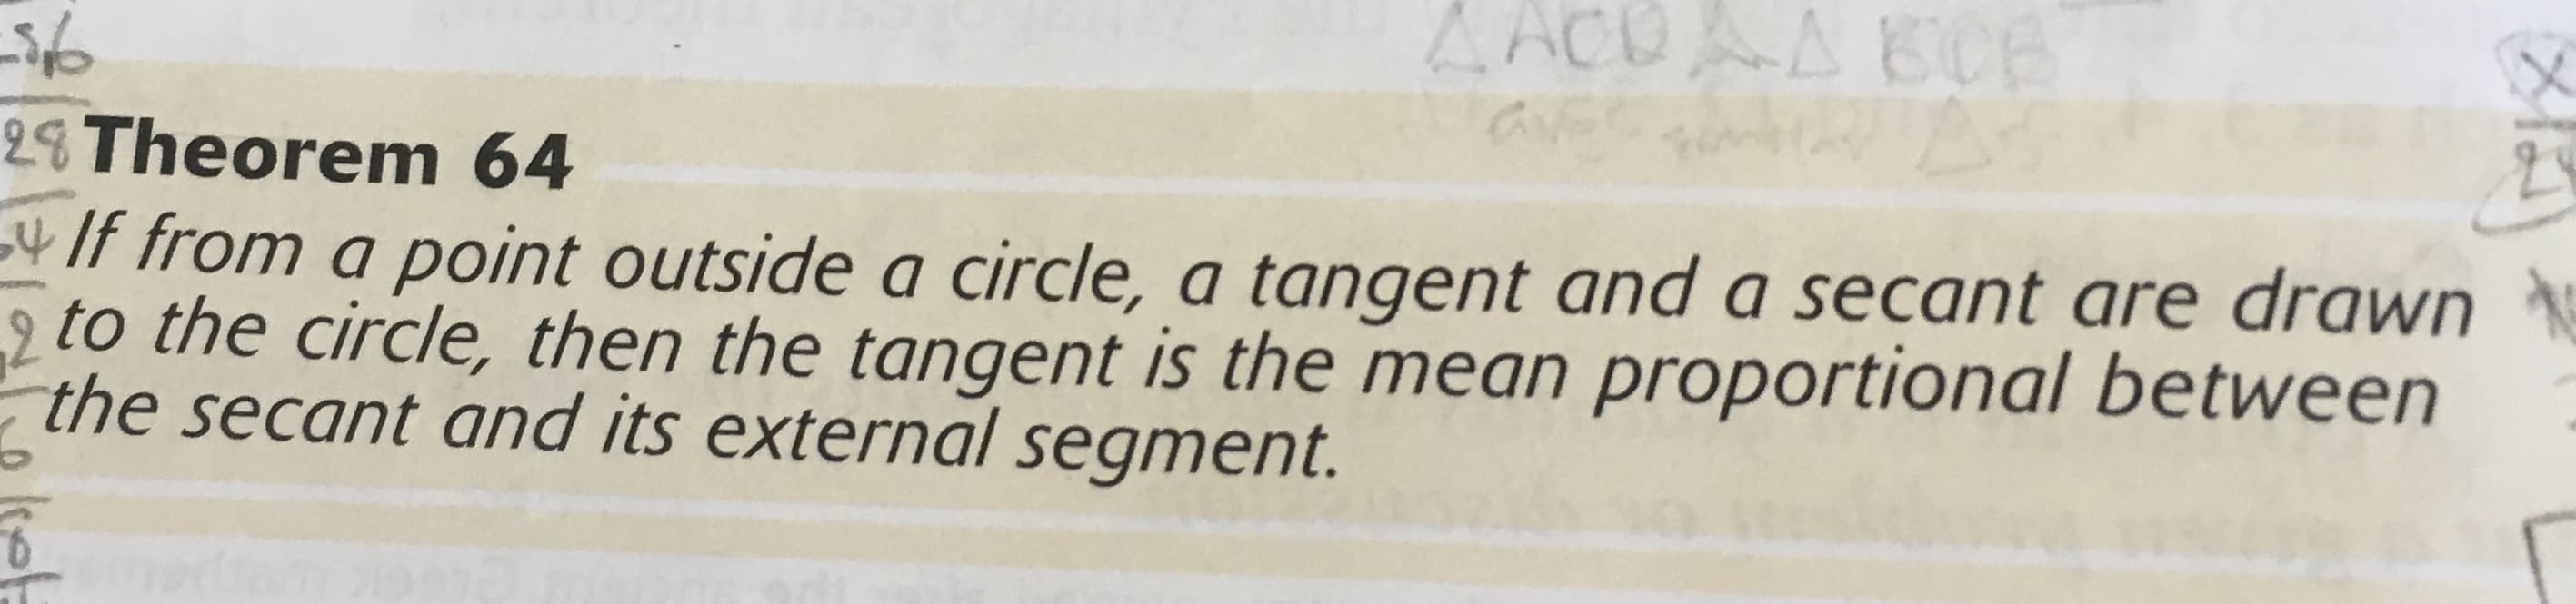 ZACUAABICE
29Theorem 64
4If from a point outside a circle, a tangent and a secant are drawn
to the circle, then the tangent is the mean proportional between
the secant and its external segment.
oket
